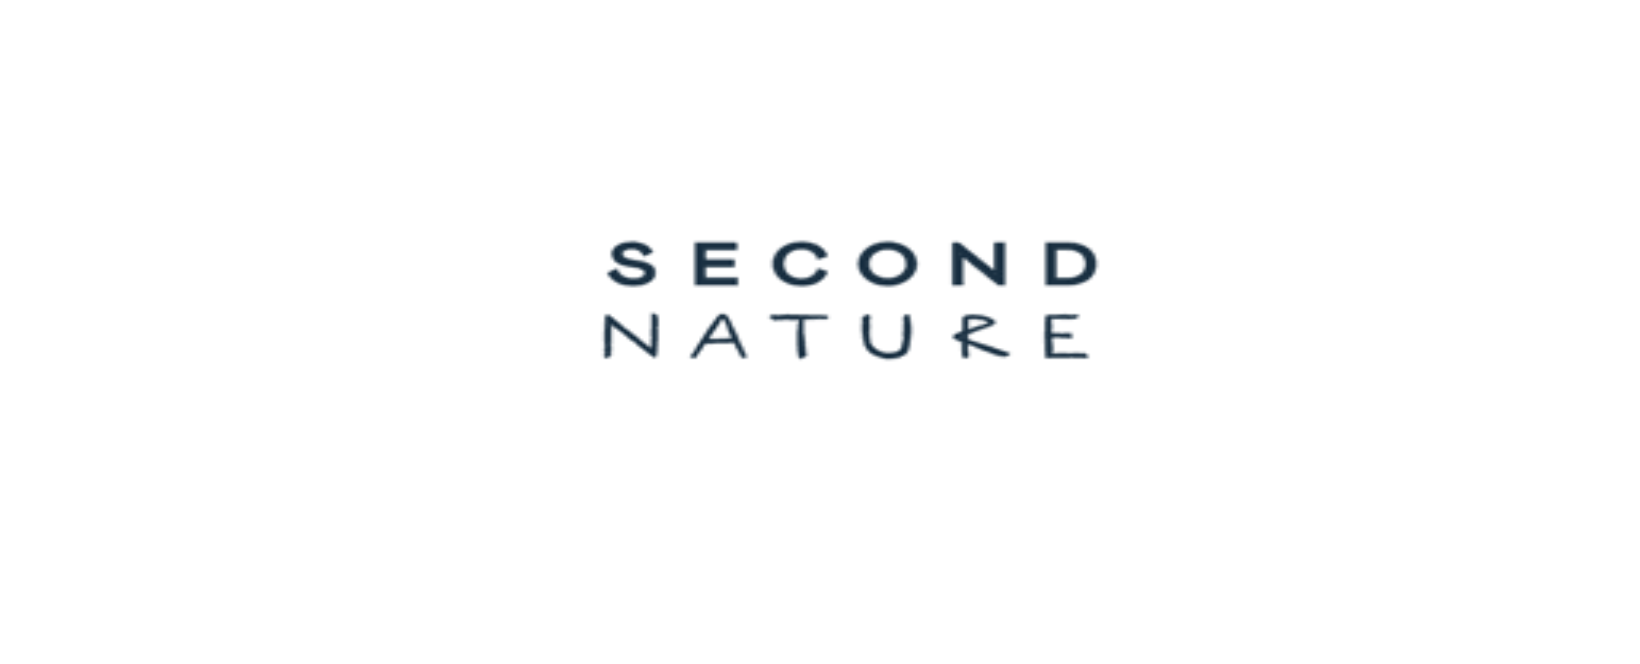 Second Nature Discount Code 2022